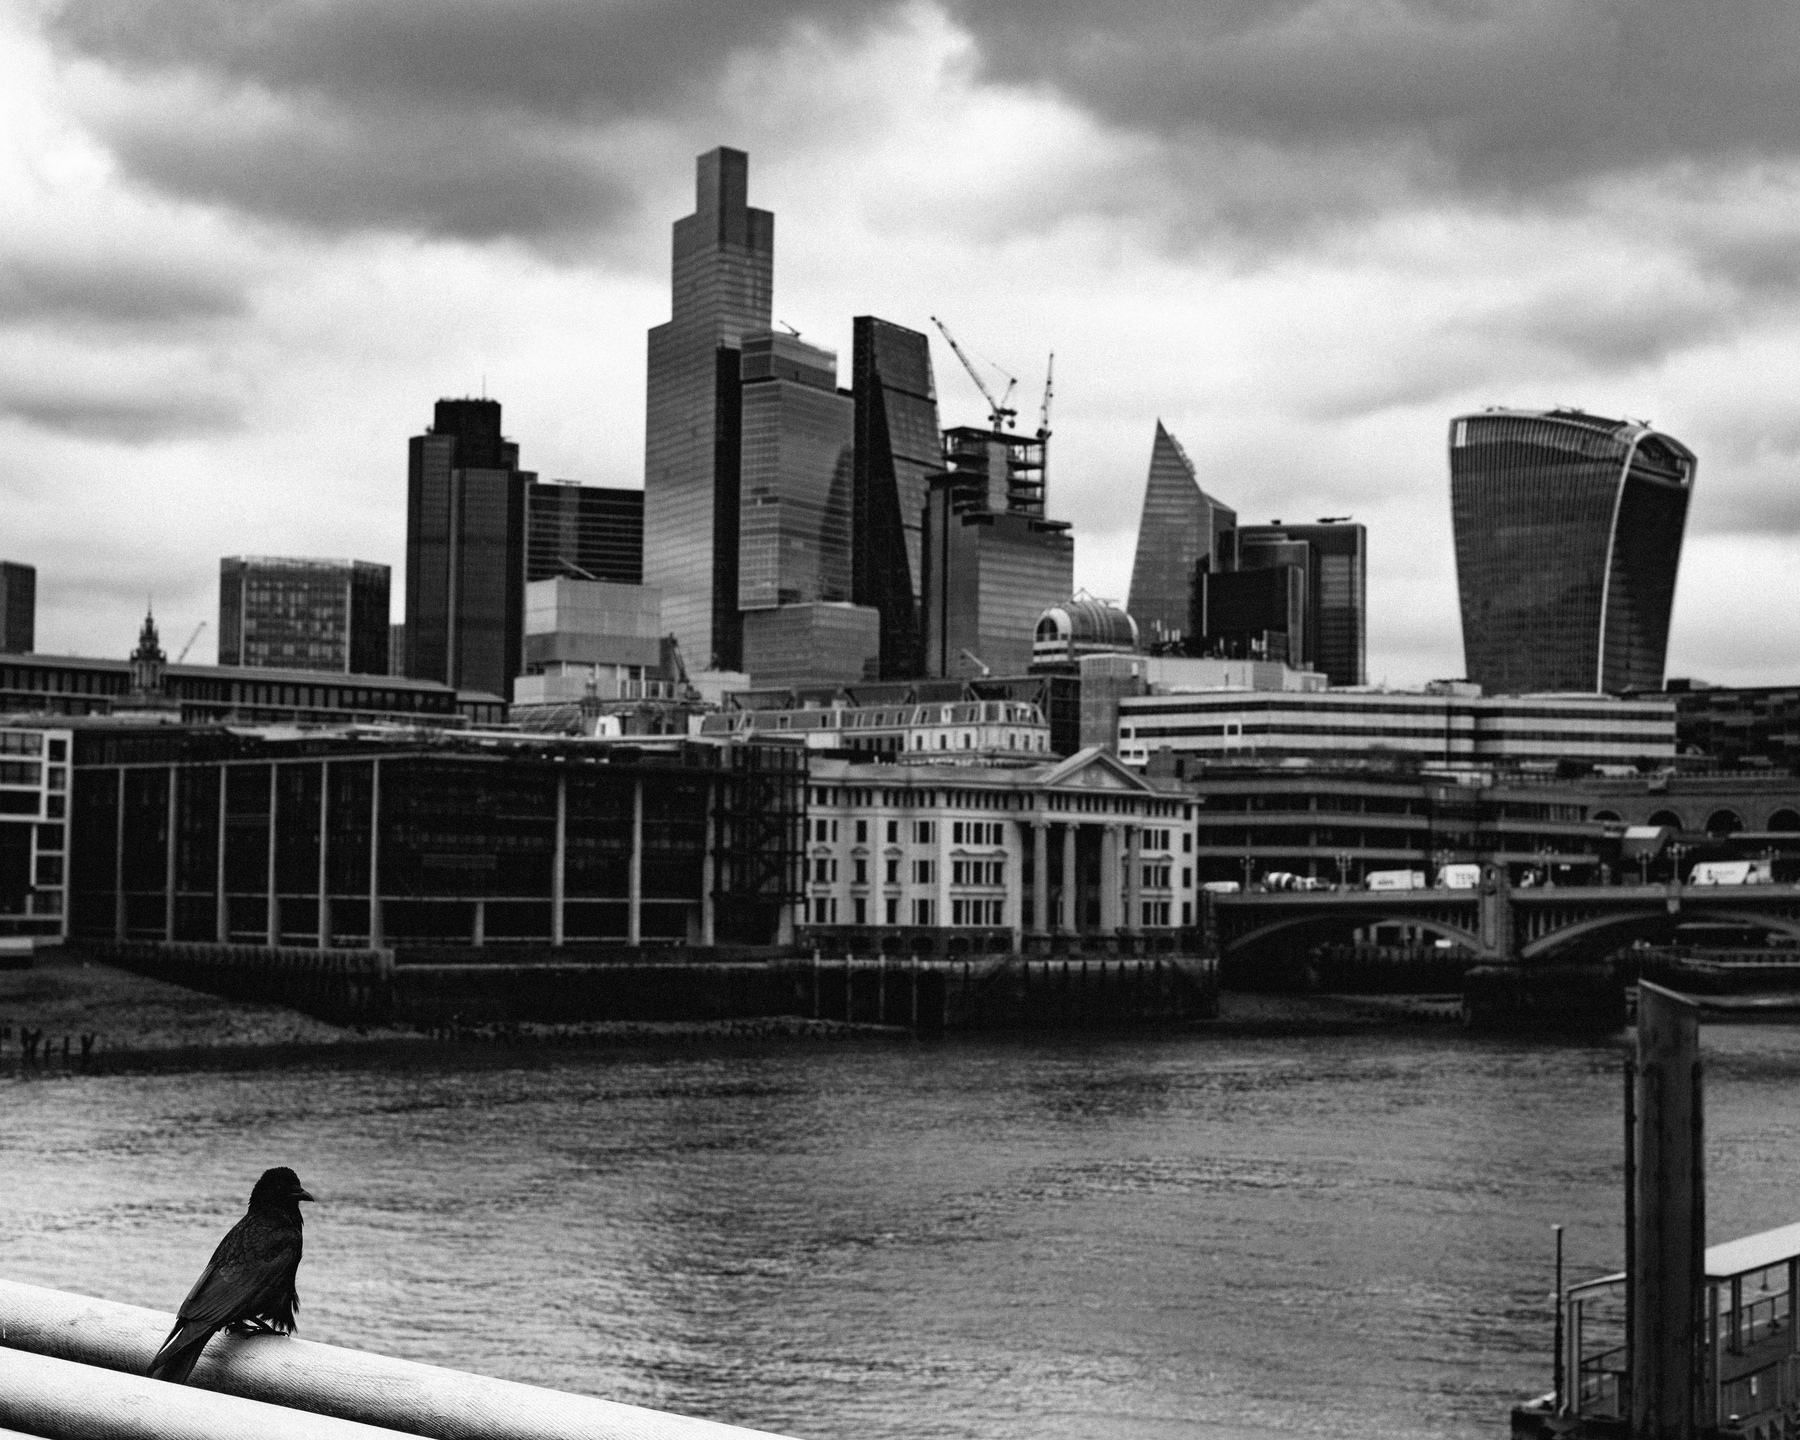 A crow perched on the Millennium Bridge, looking over a London Skyline under dramatic cloudy skies.